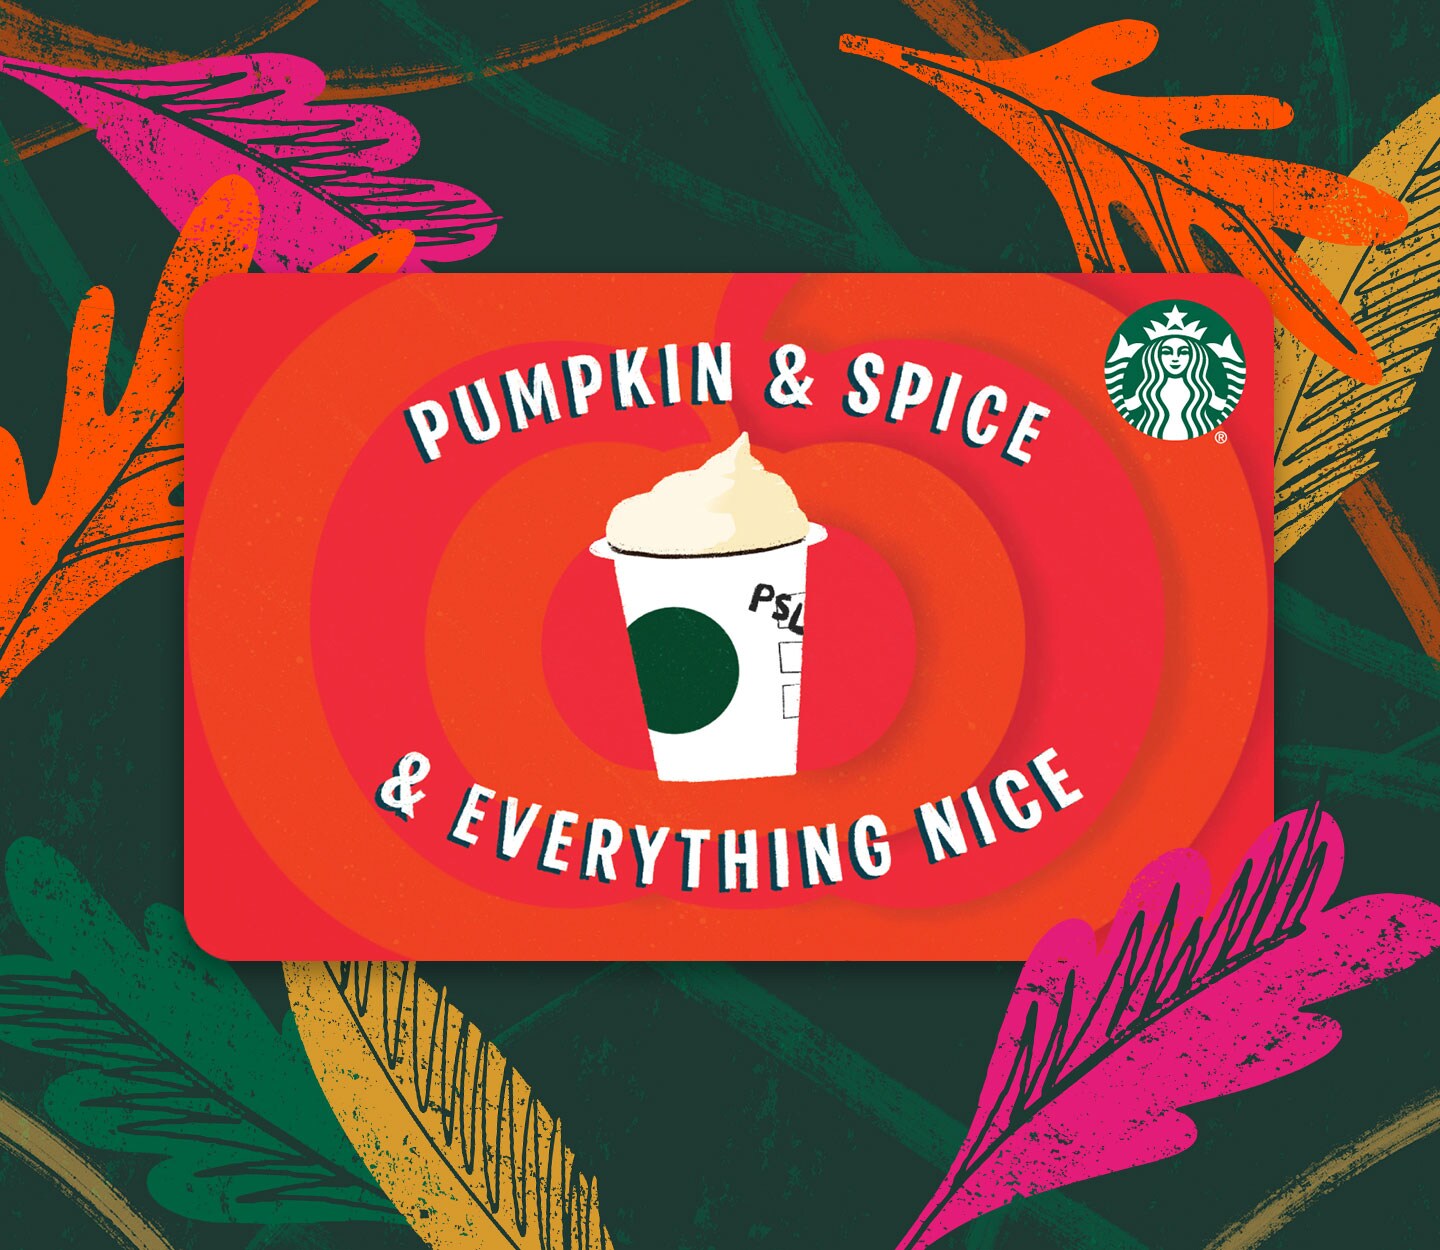 A Starbucks gift card with the words “Pumpkin & Spice & everything nice” displayed with an illustrated Pumpkin Spice Latte.